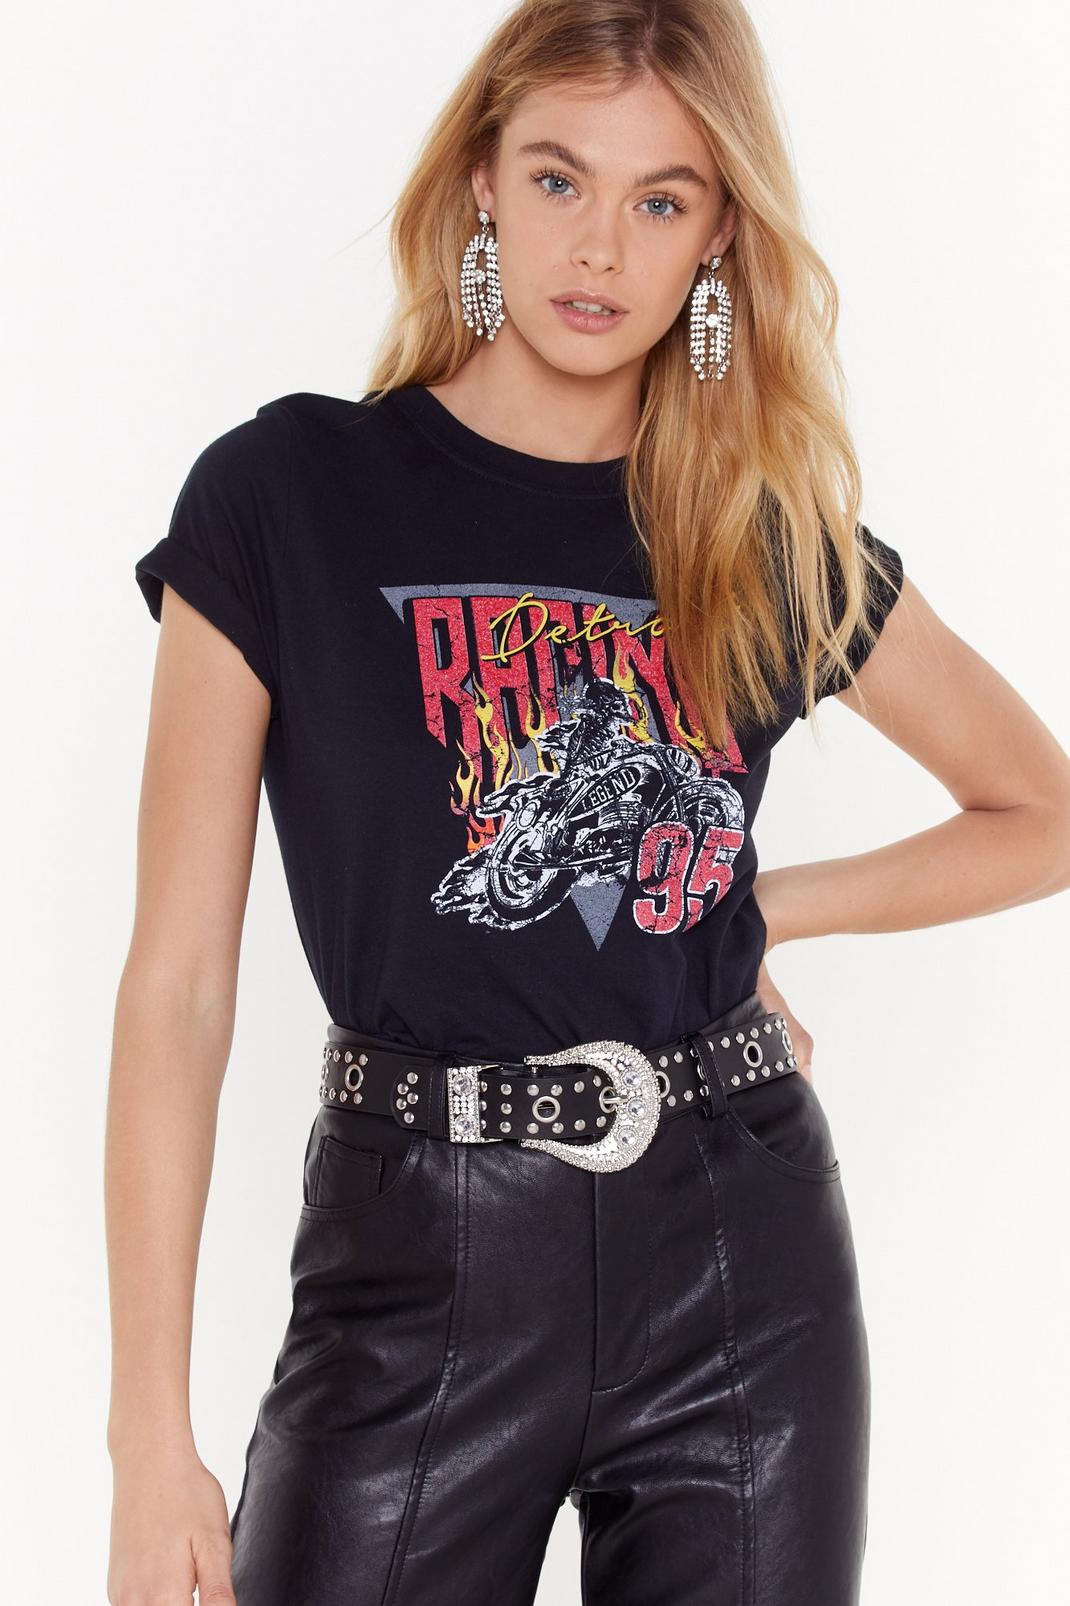 Race You There Graphic Tee | Nasty Gal